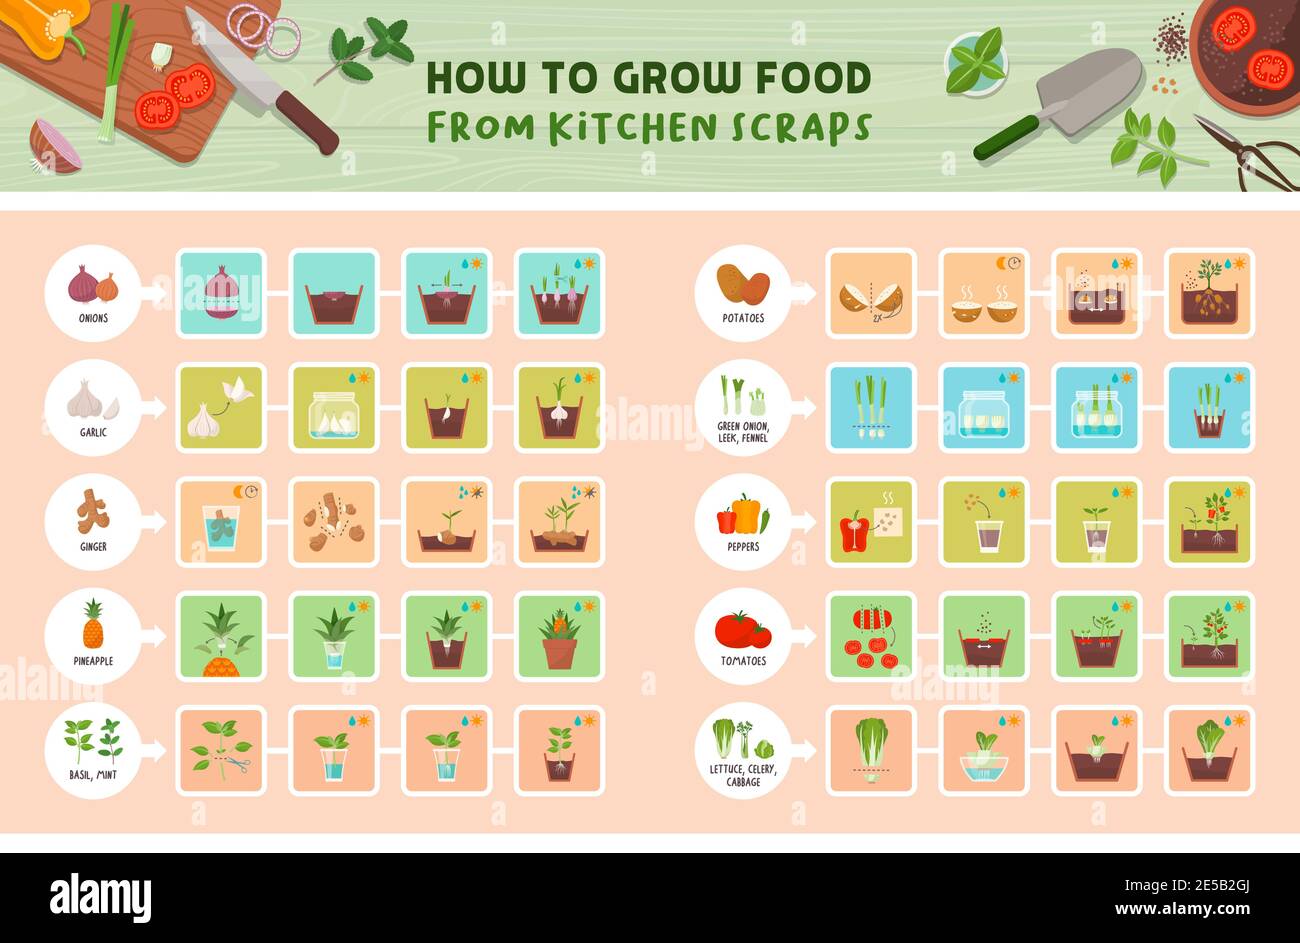 How to grow food from kitchen scraps infographic how to grow ...